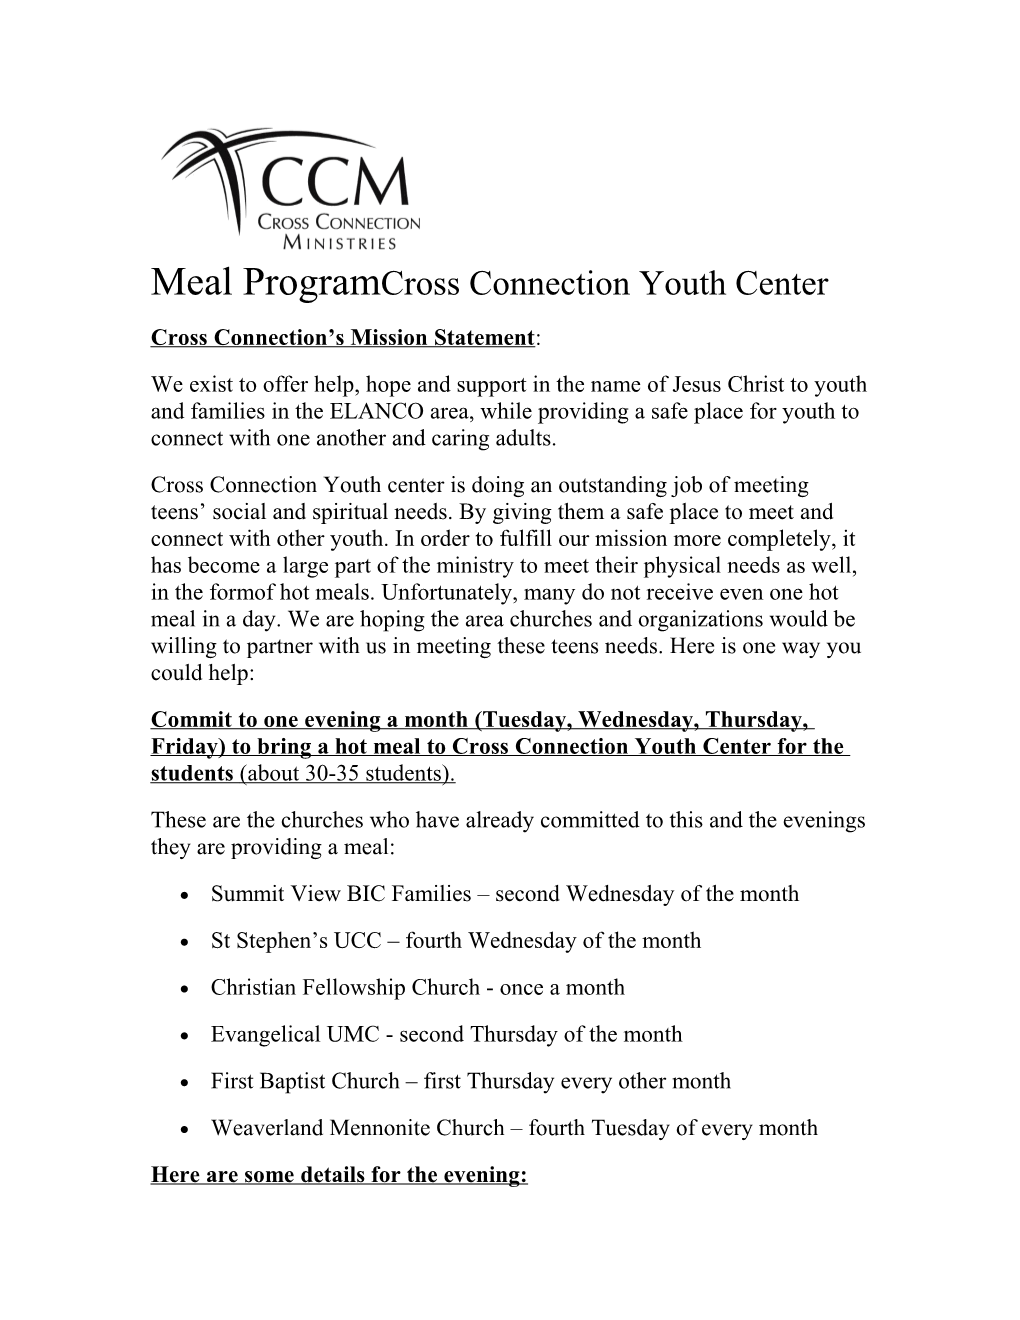 Meal Program Cross Connection Youth Center